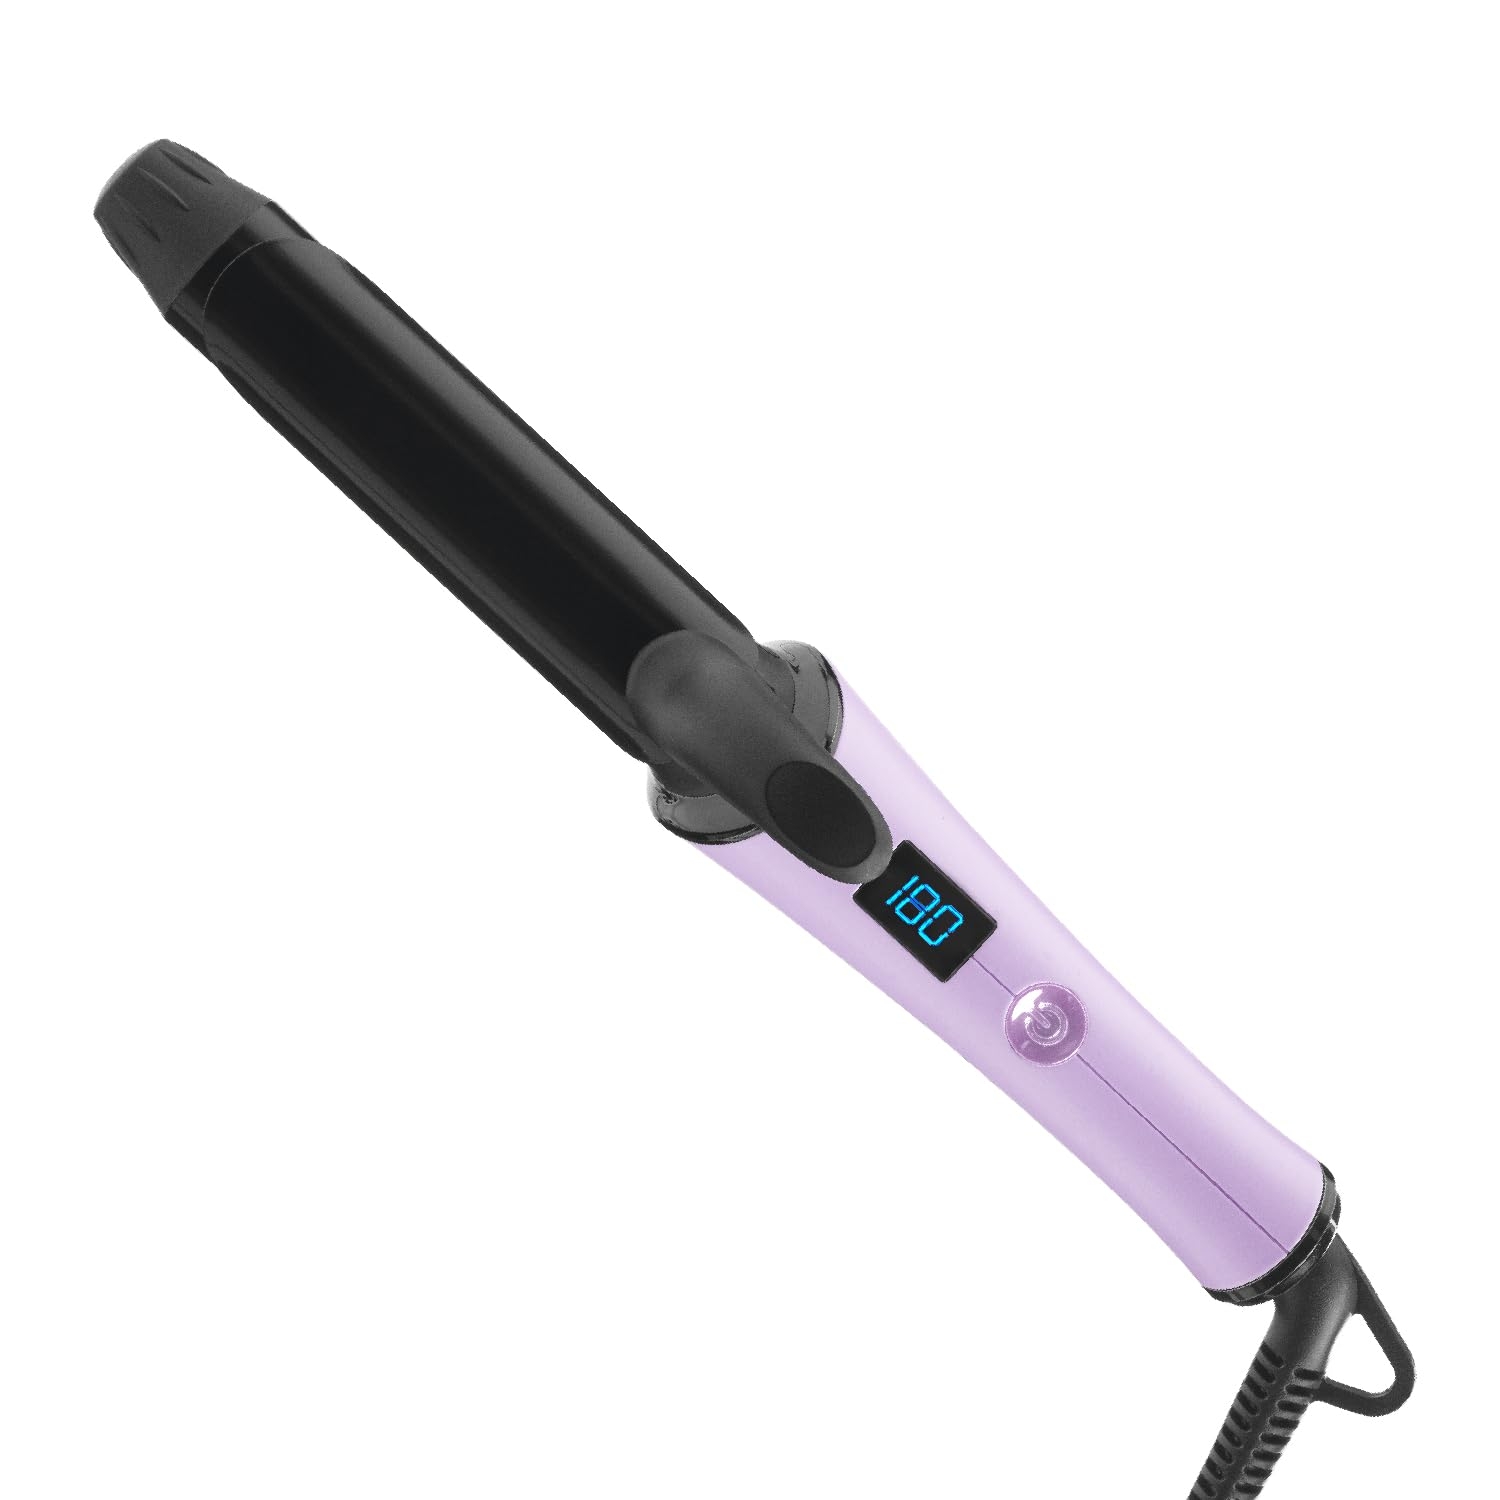 Vega Mini Hair Curler for Women with 25 mm Barrel, Ceramic Coated Plates | 1 Hour Auto Cut-out (Go Mini Series VHCH-08)